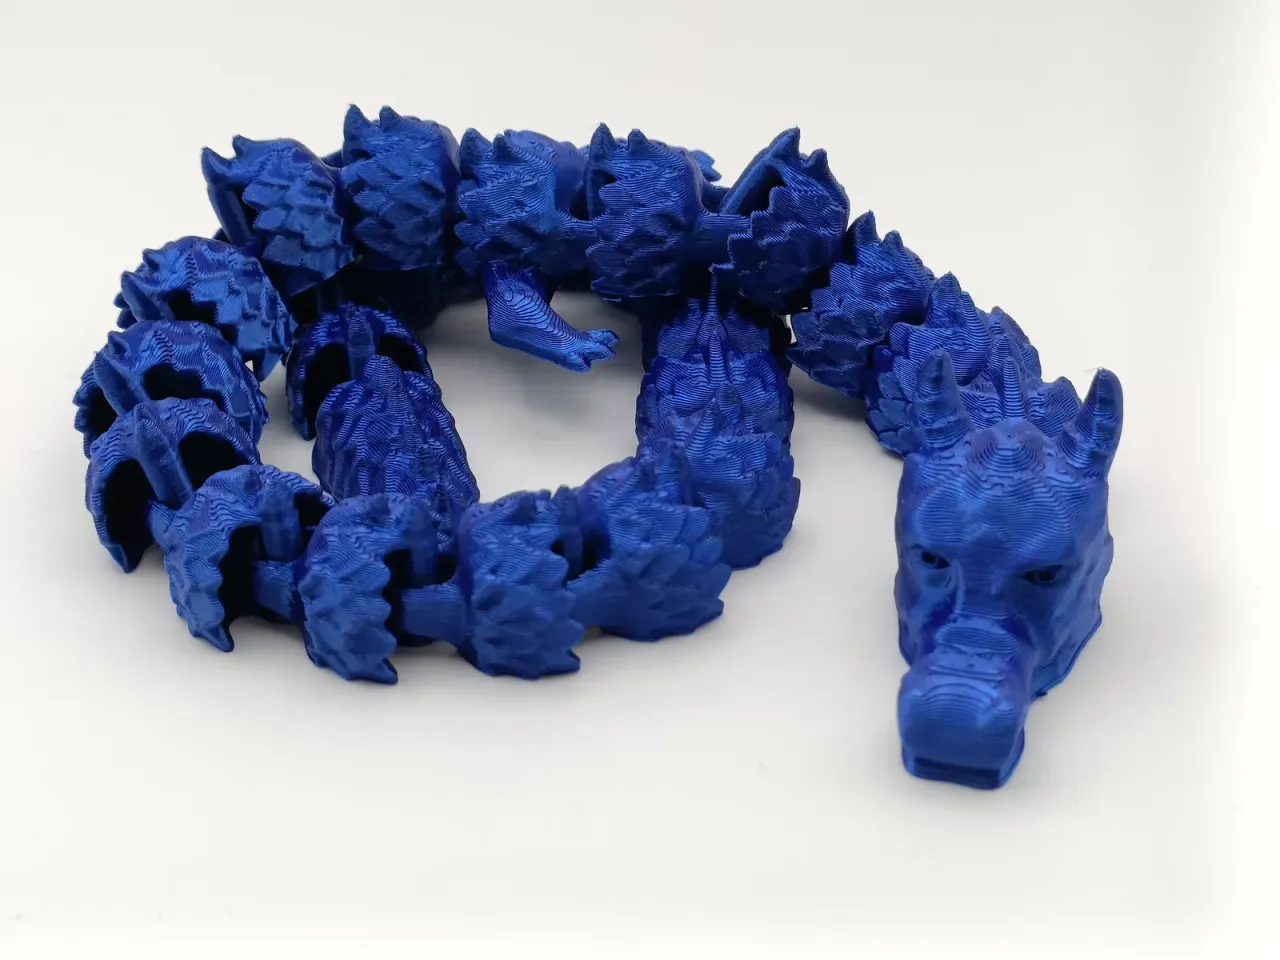 The Best Articulated Dragon 3D Prints – Articulated Dragon STL